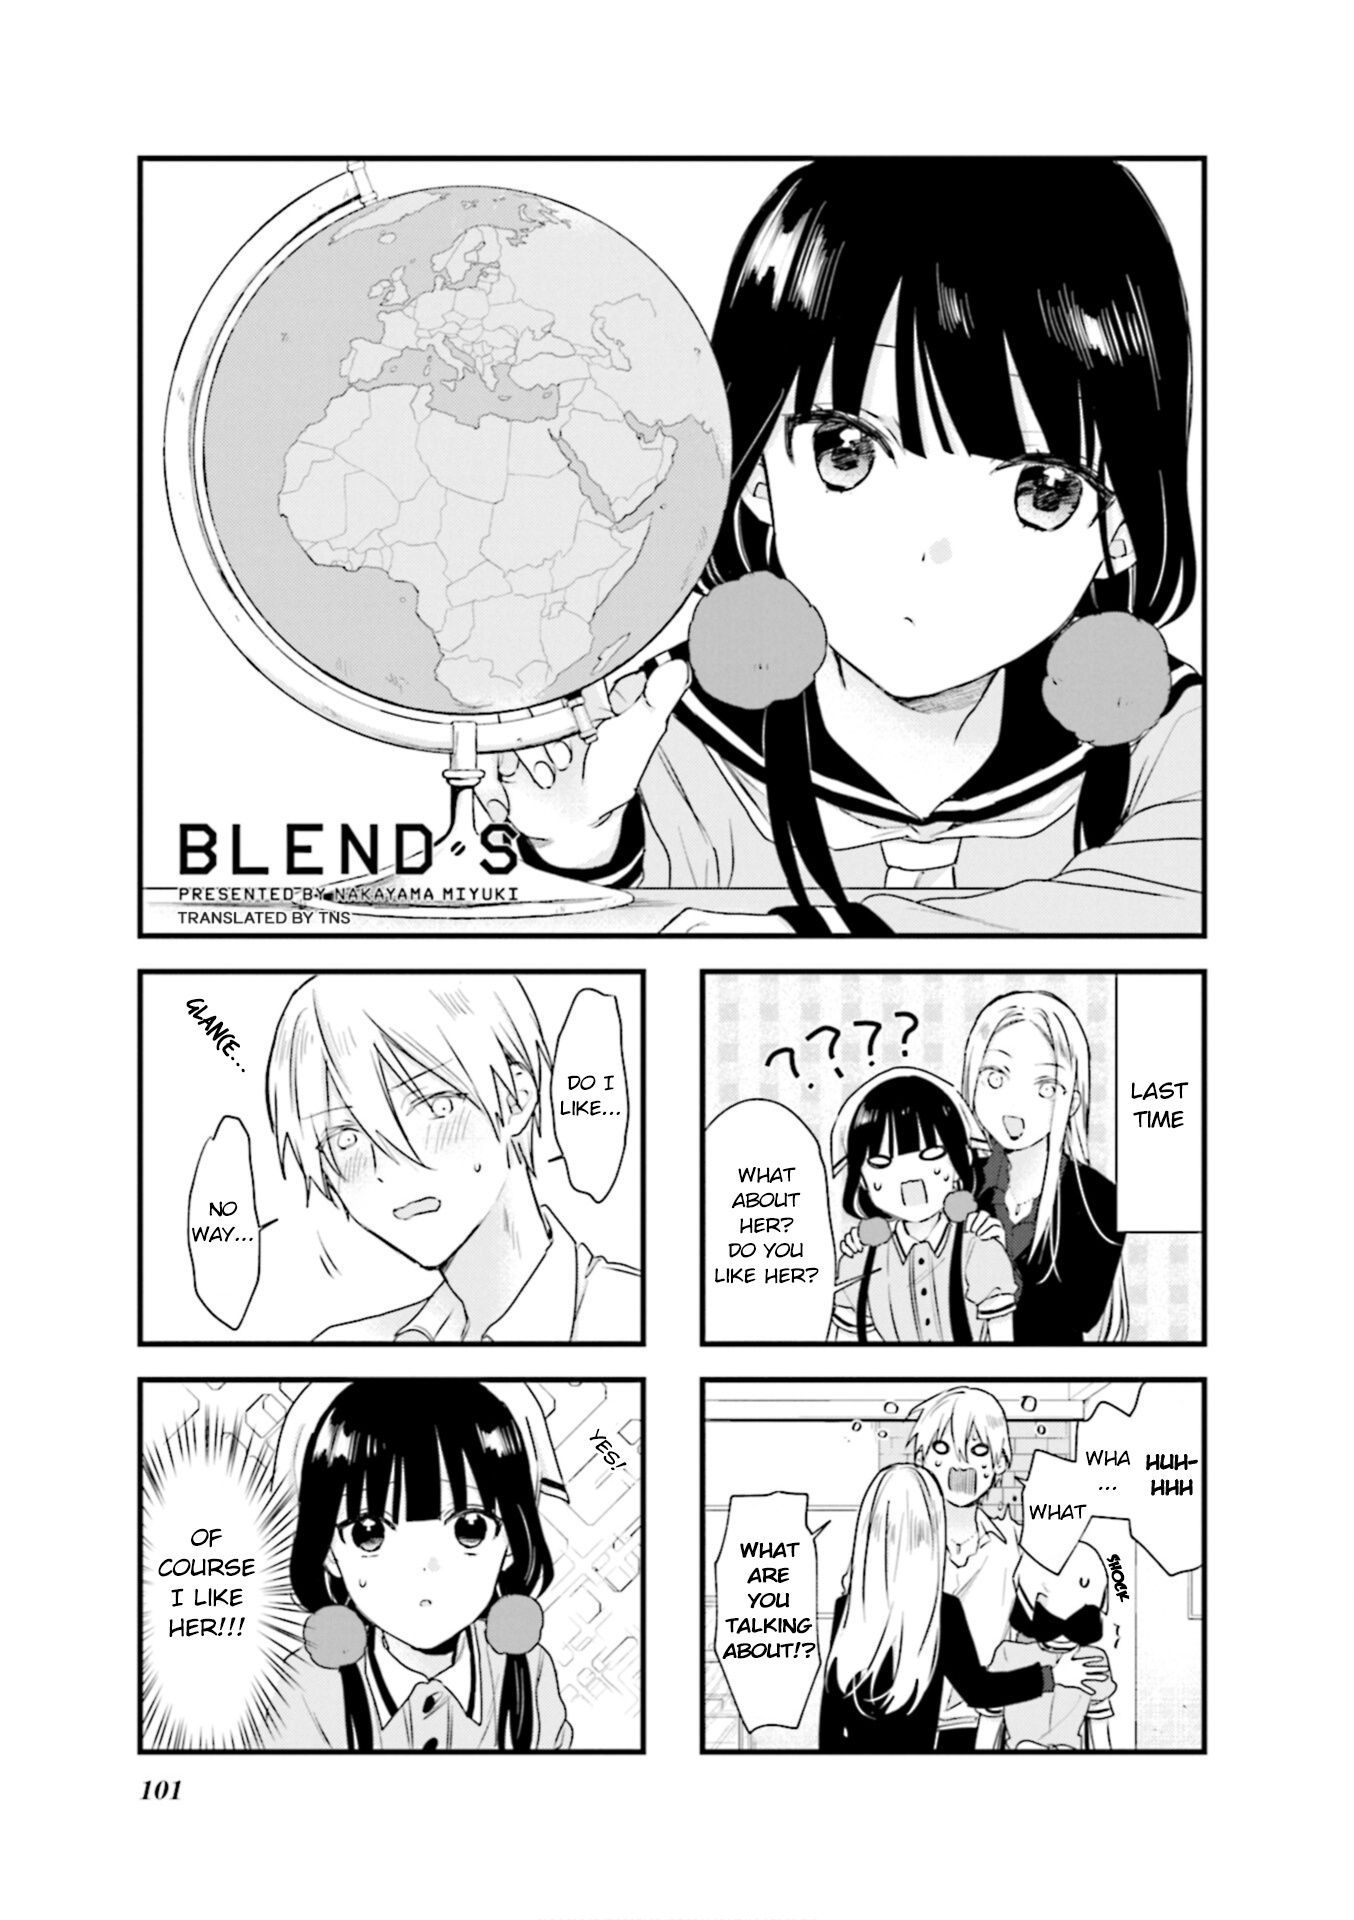 Blend-S - Page 1